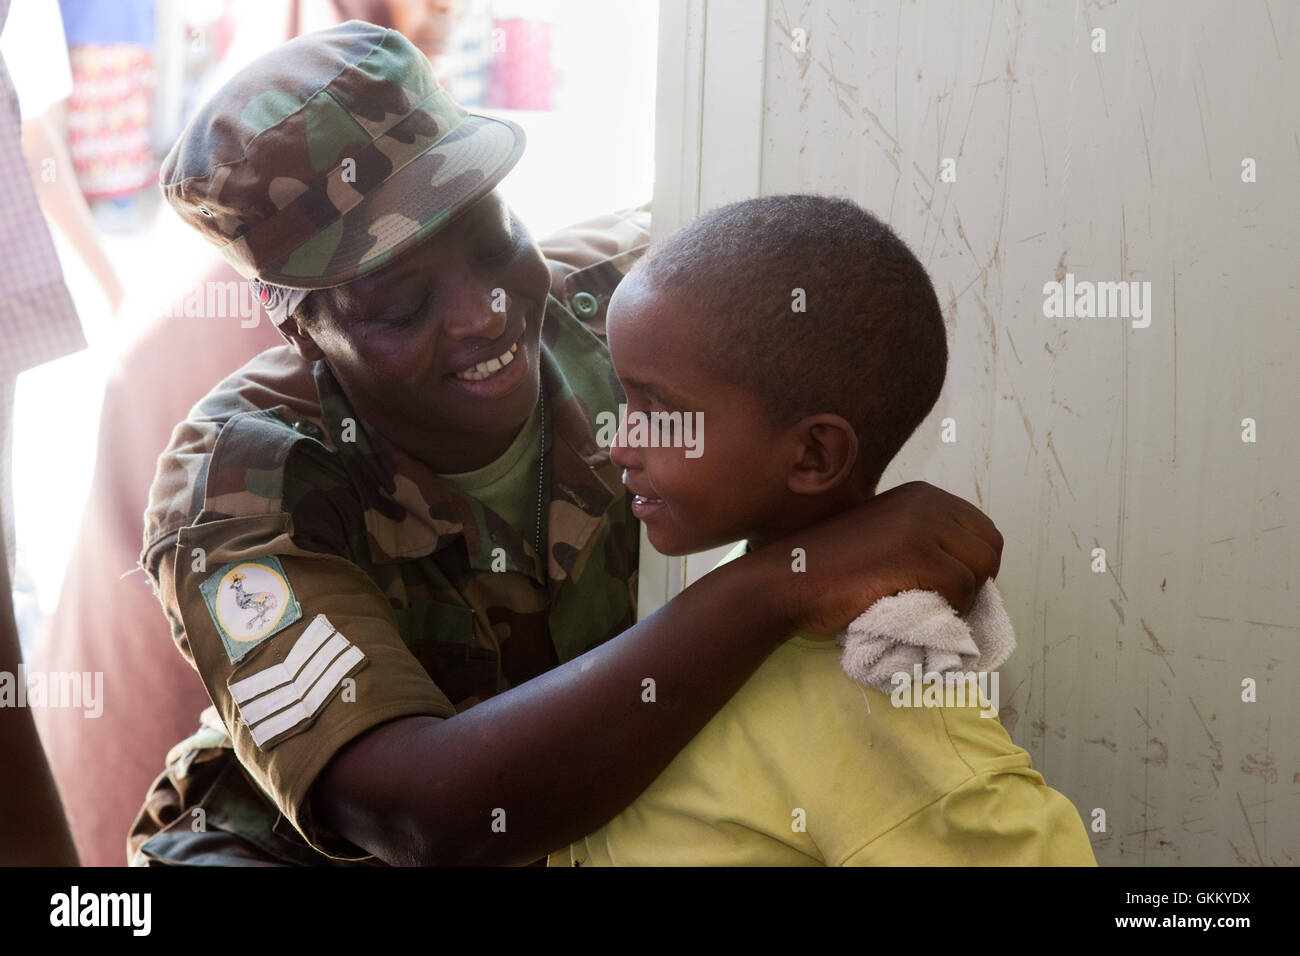 An AMISOM nurse caring for a young boy at the Out Patients Department in Mogadishu, Somalia Stock Photo